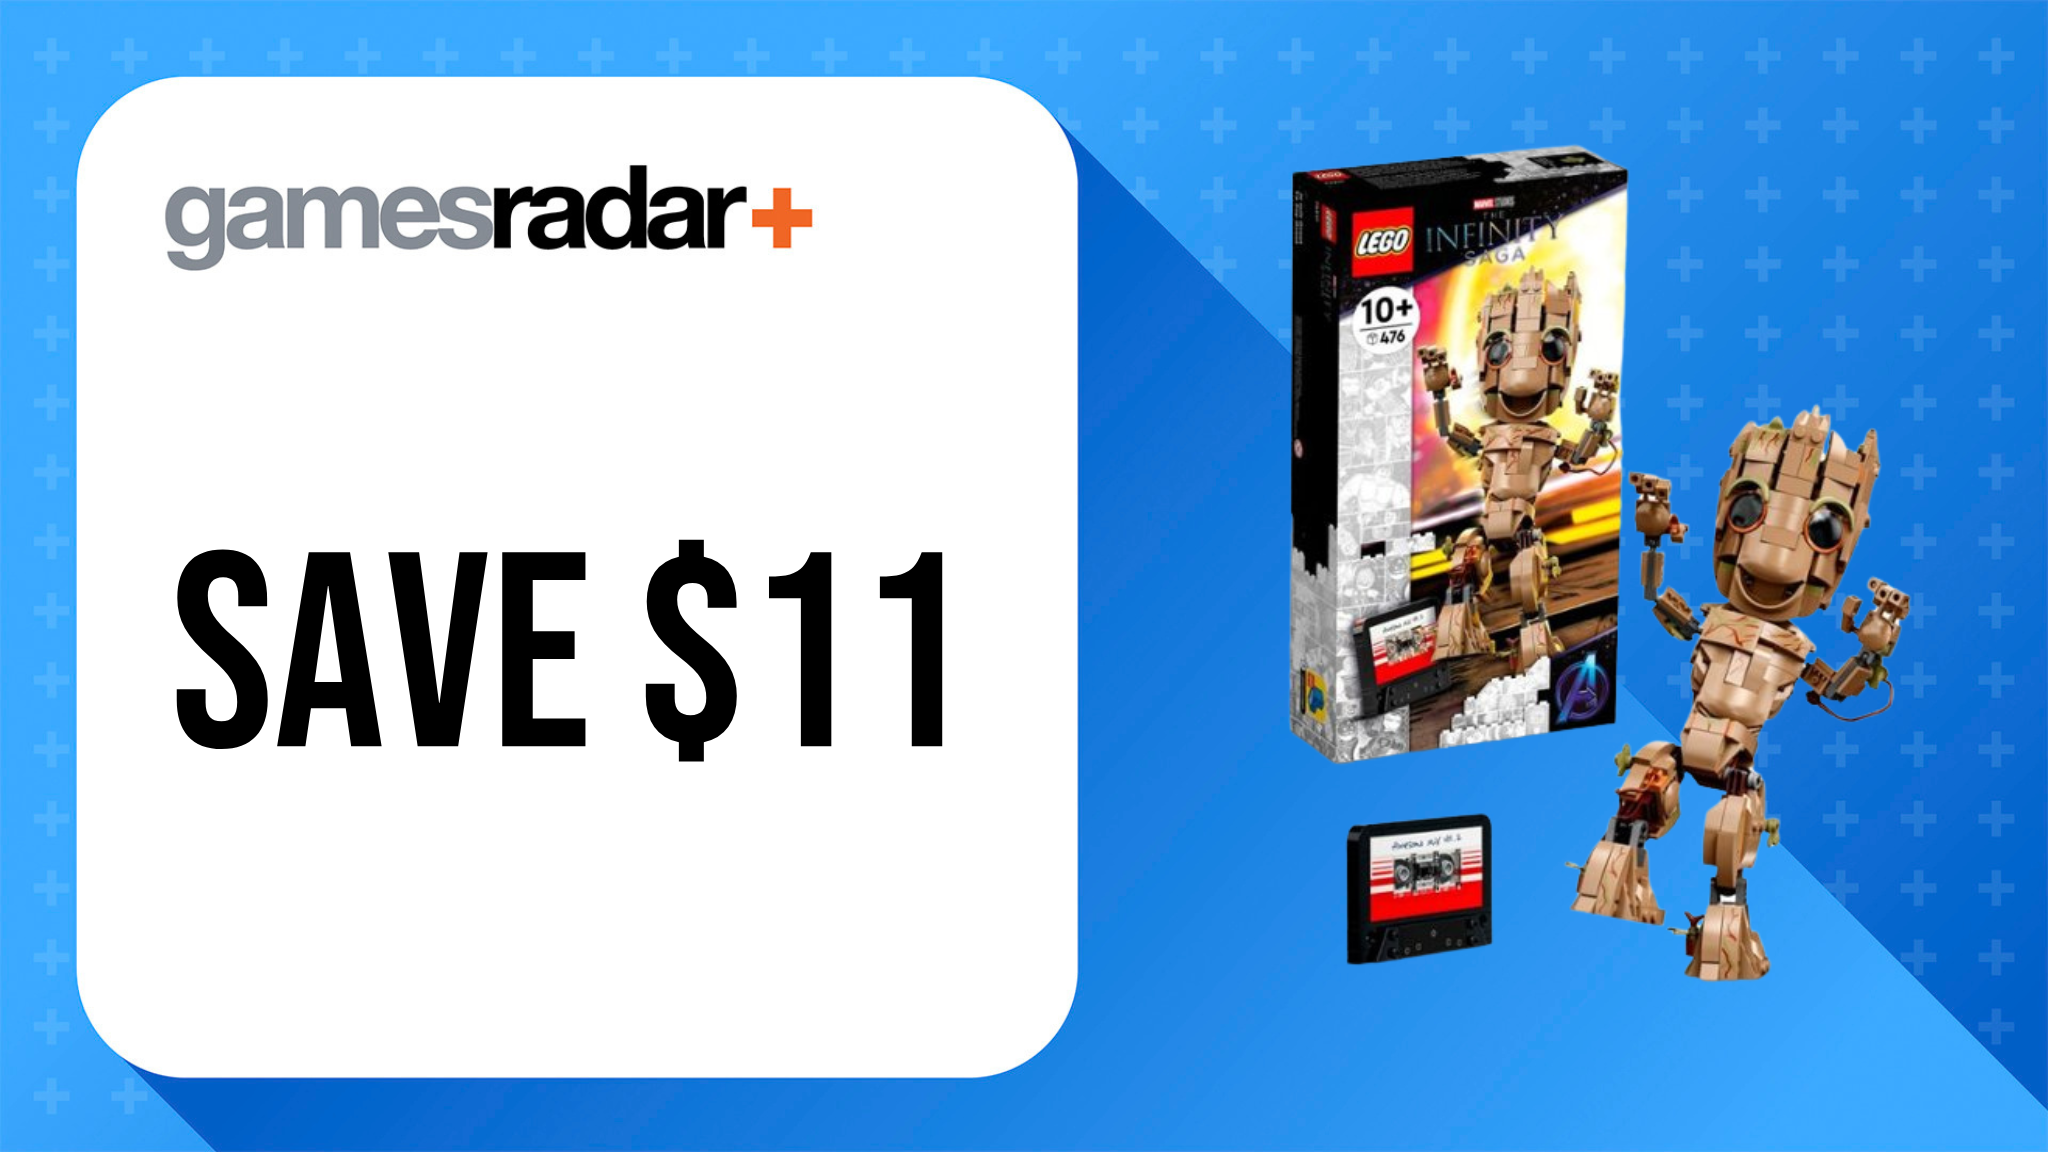 LEGO Marvel I am Groot deal image with $11 saving stamp and blue background